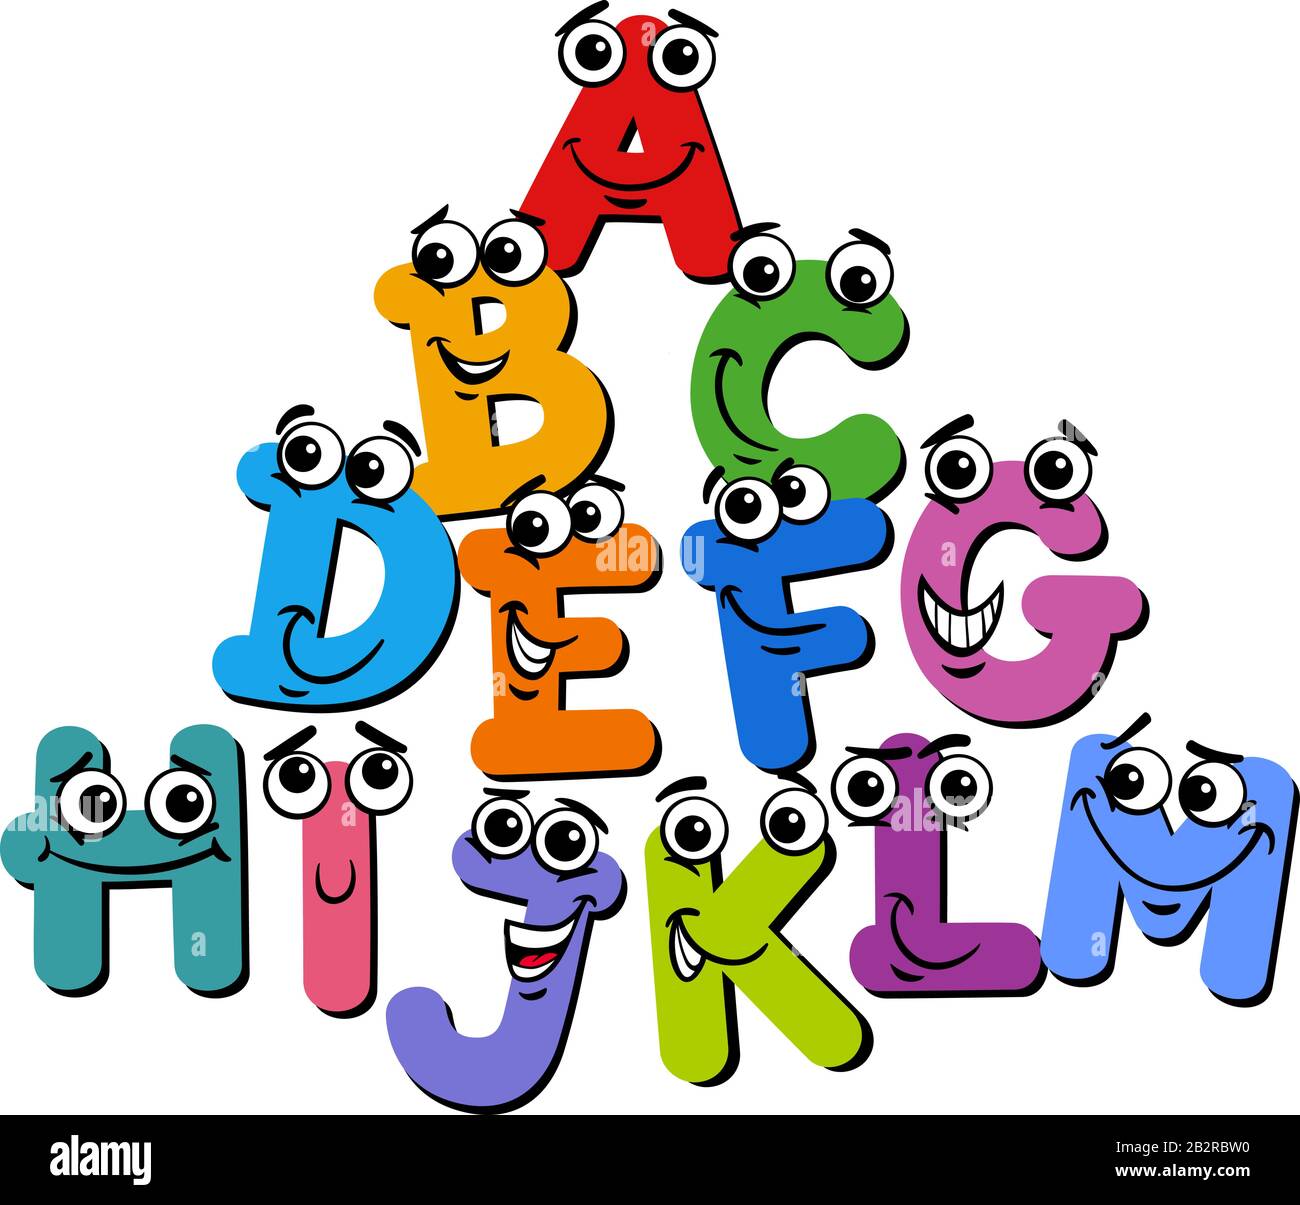 Cartoon Illustration Of Funny Capital Letter Characters Alphabet Group